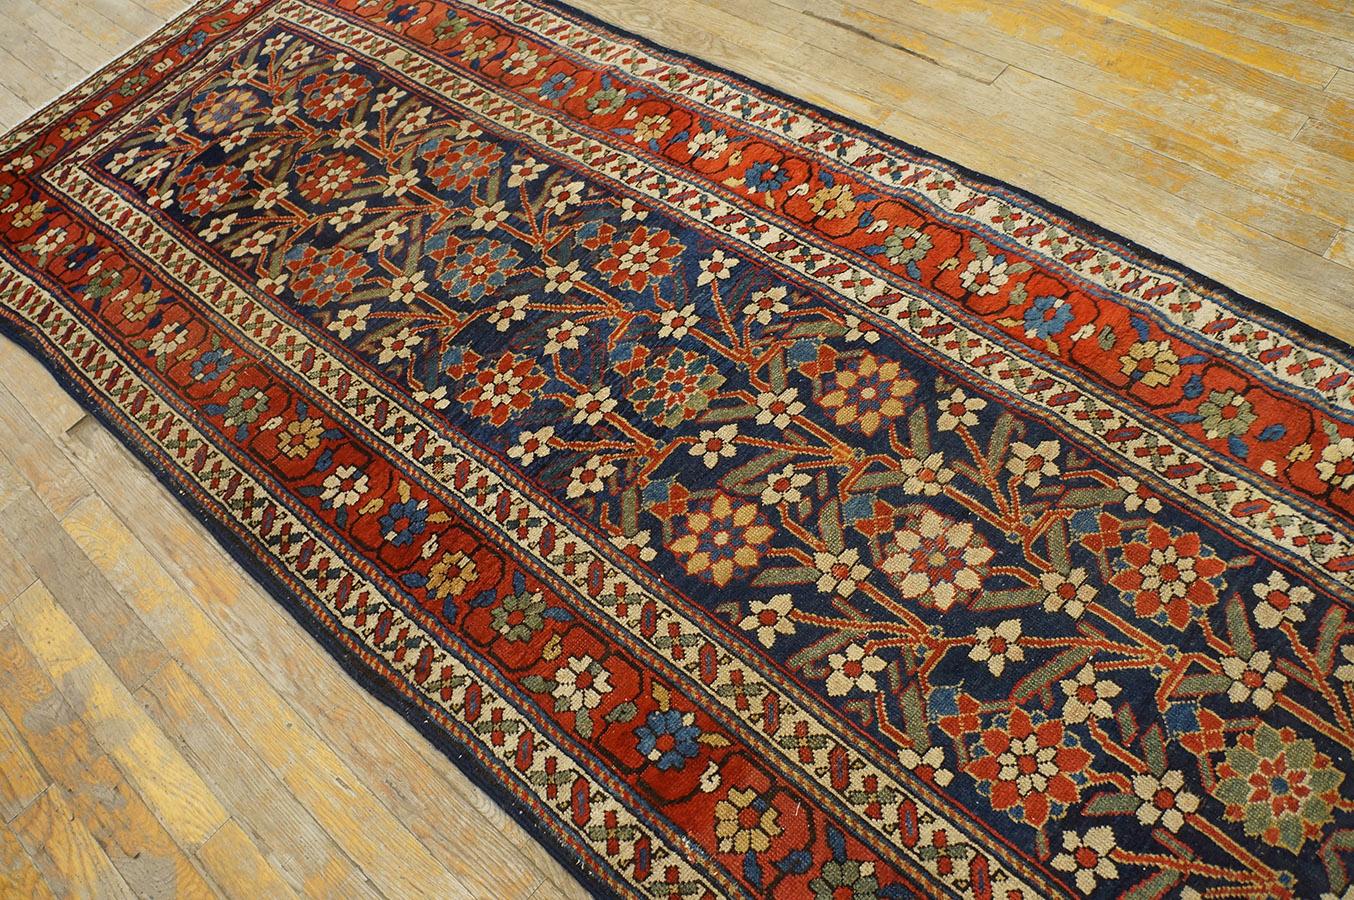 19th Century NW Persian Carpet ( 3' 3'' x 11' 8'' - 99 x 355 cm ) For Sale 4